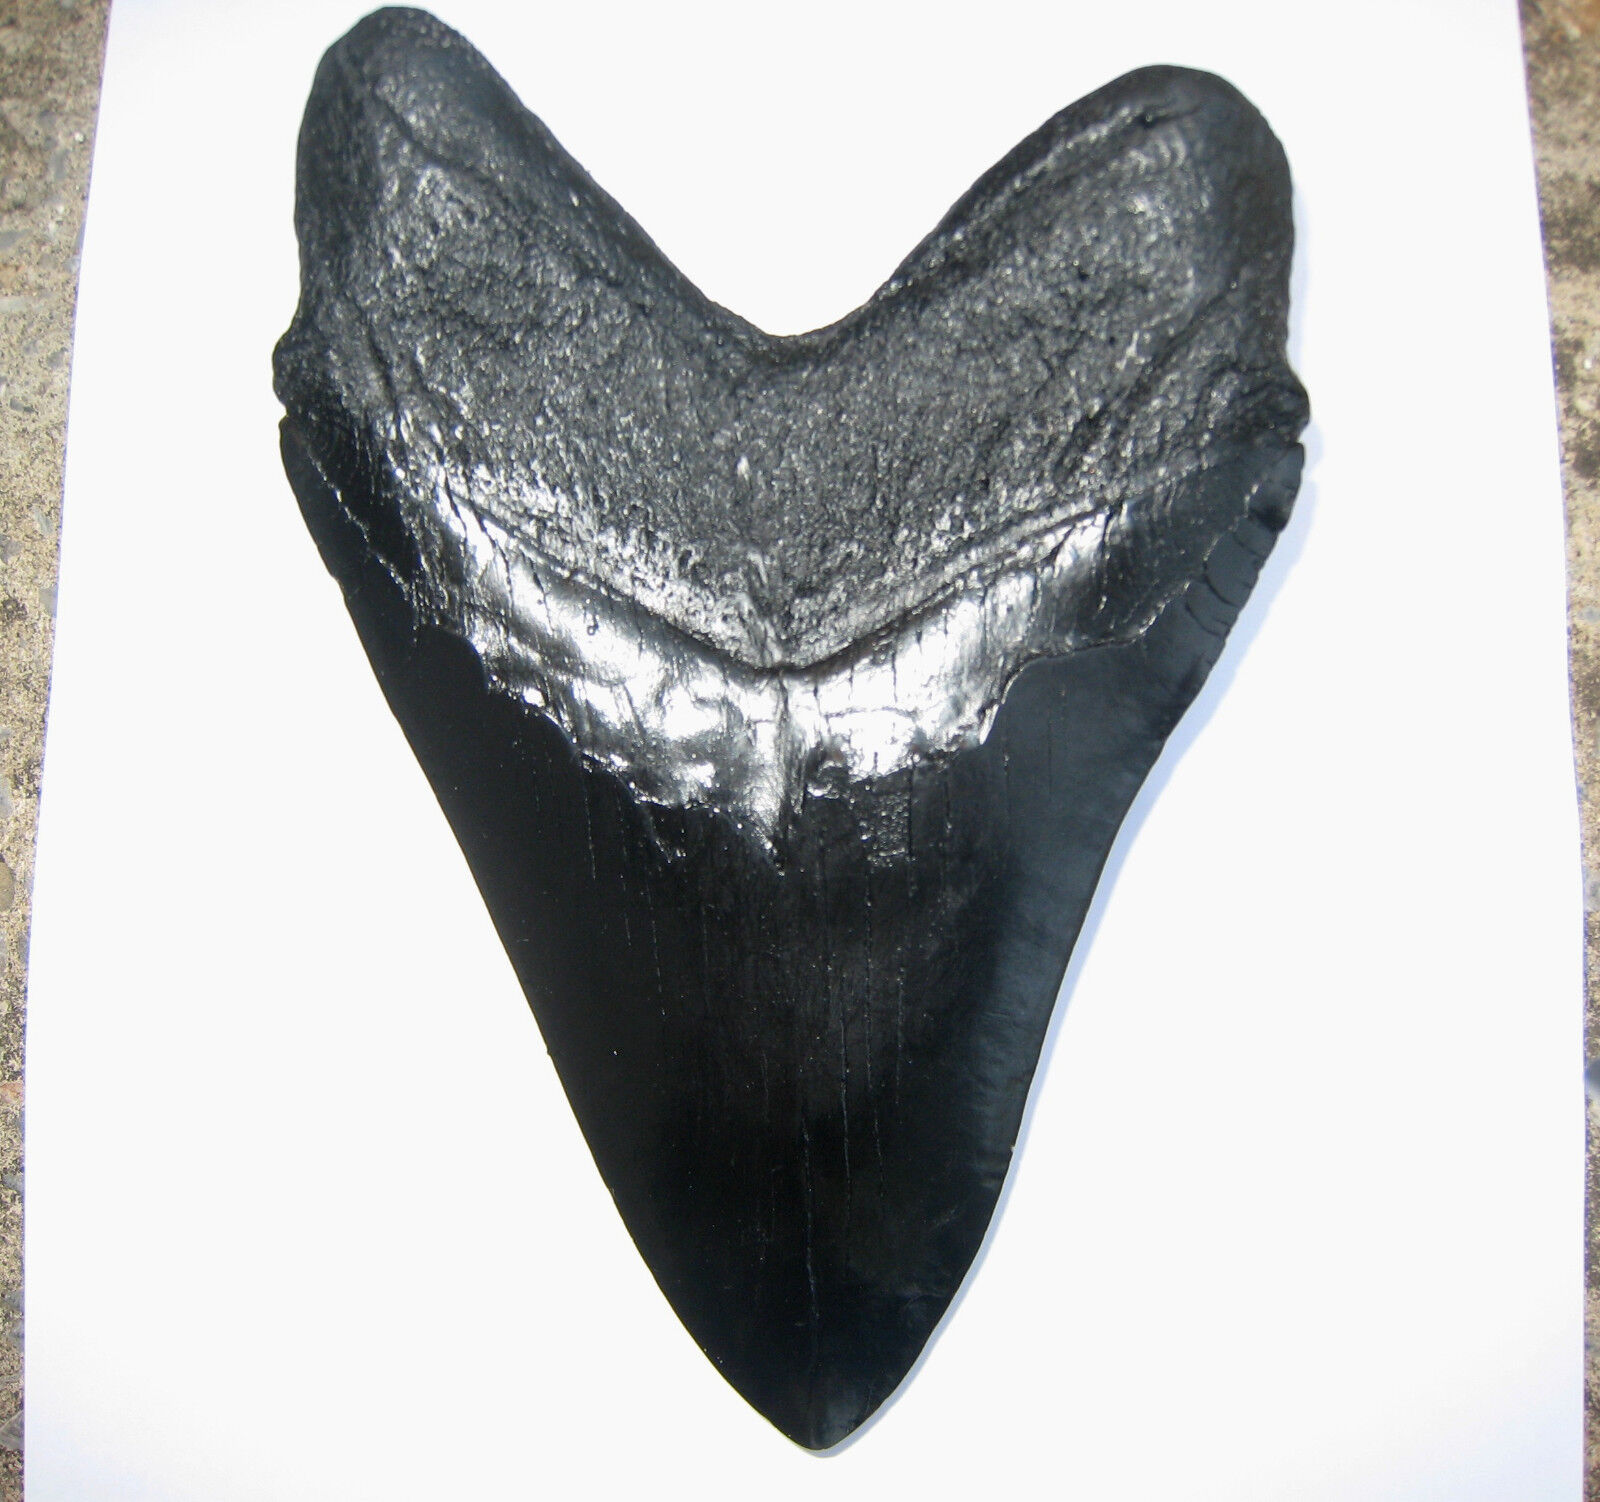 5 INCH LONG MEGALODON TOOTH REPLICA BIG FOSSIL GIANT RELIC TEETH HUGE SHARK MEG